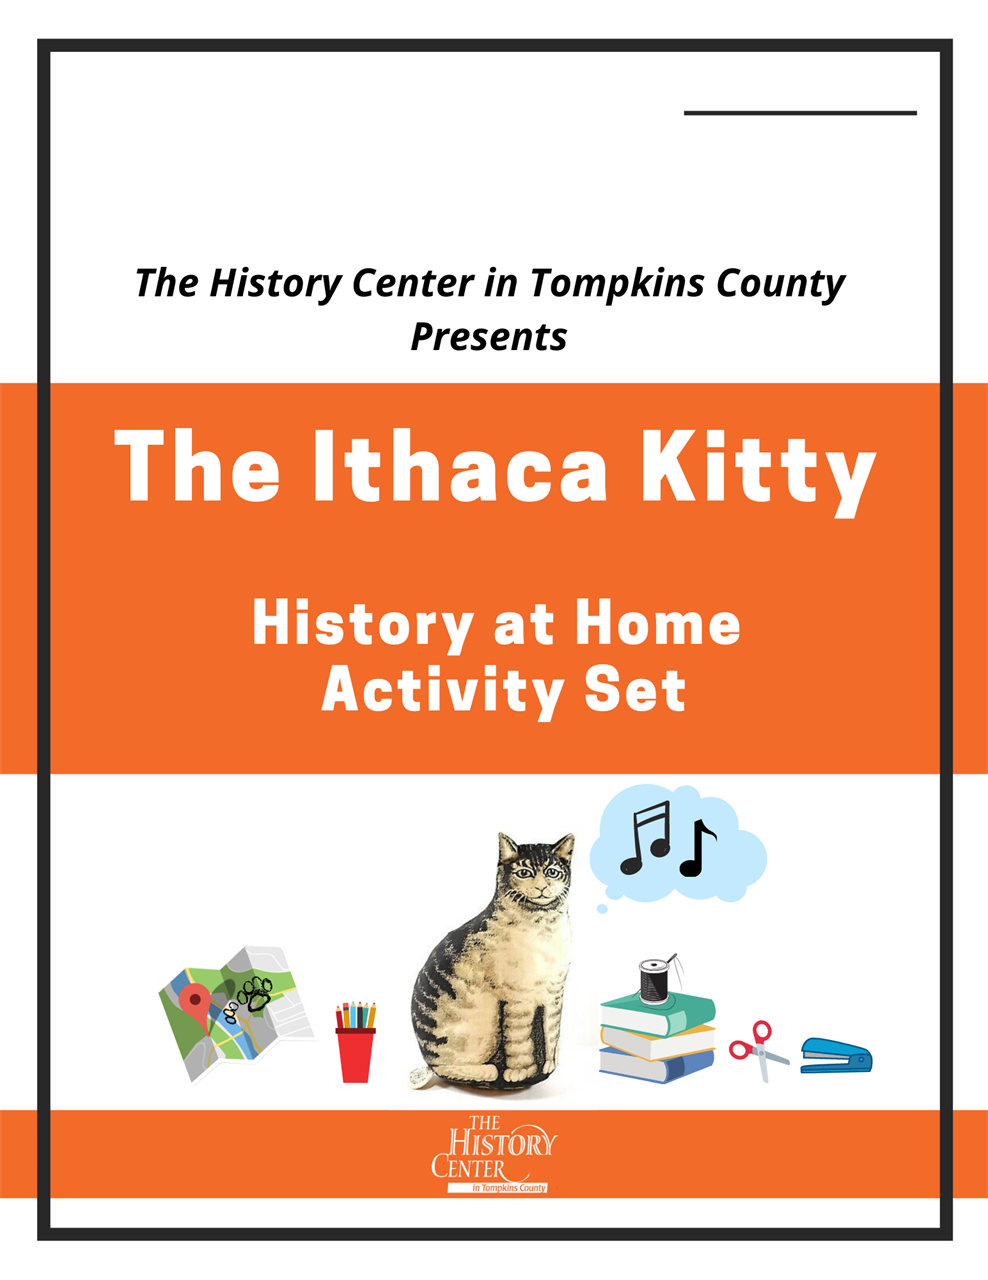 "The Ithaca Kitty" History at Home Activity Set